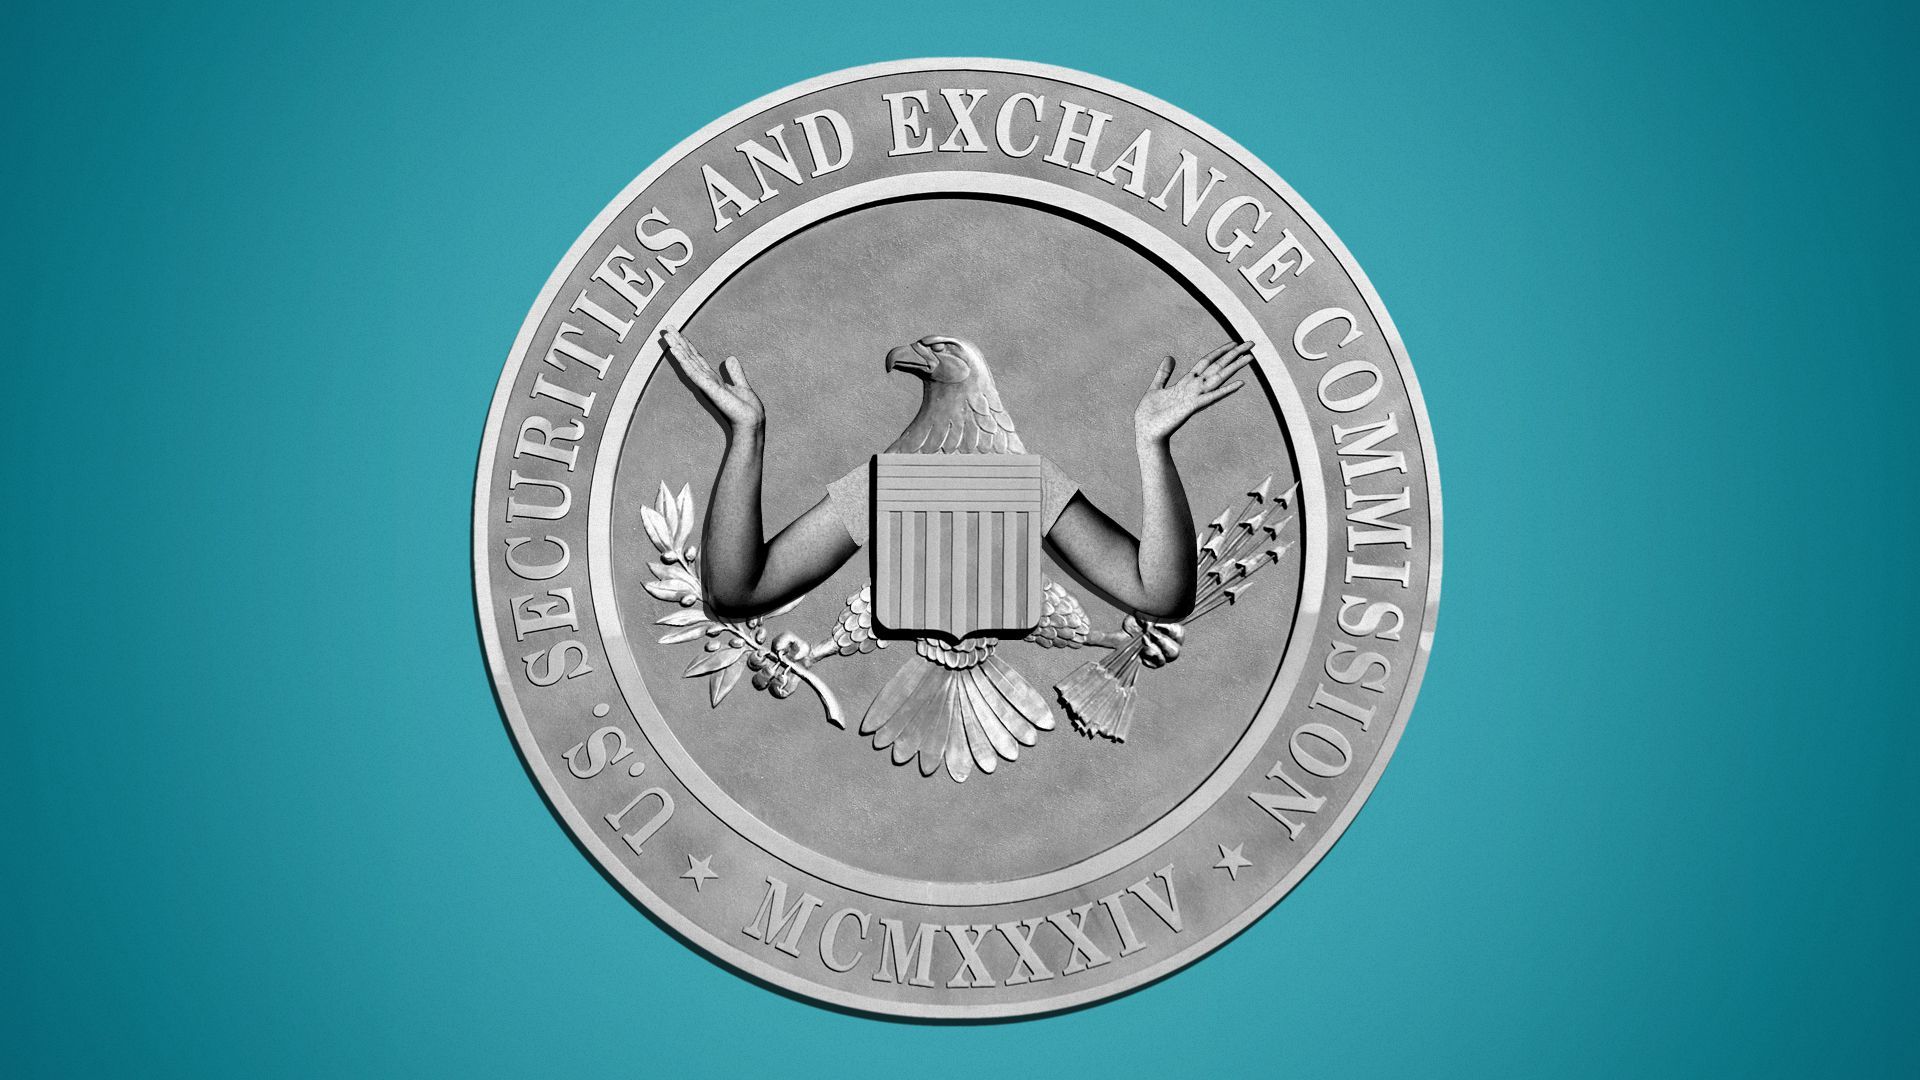 Illustration of the eagle on the Securities and Exchange Commission seal with shrugging arms.